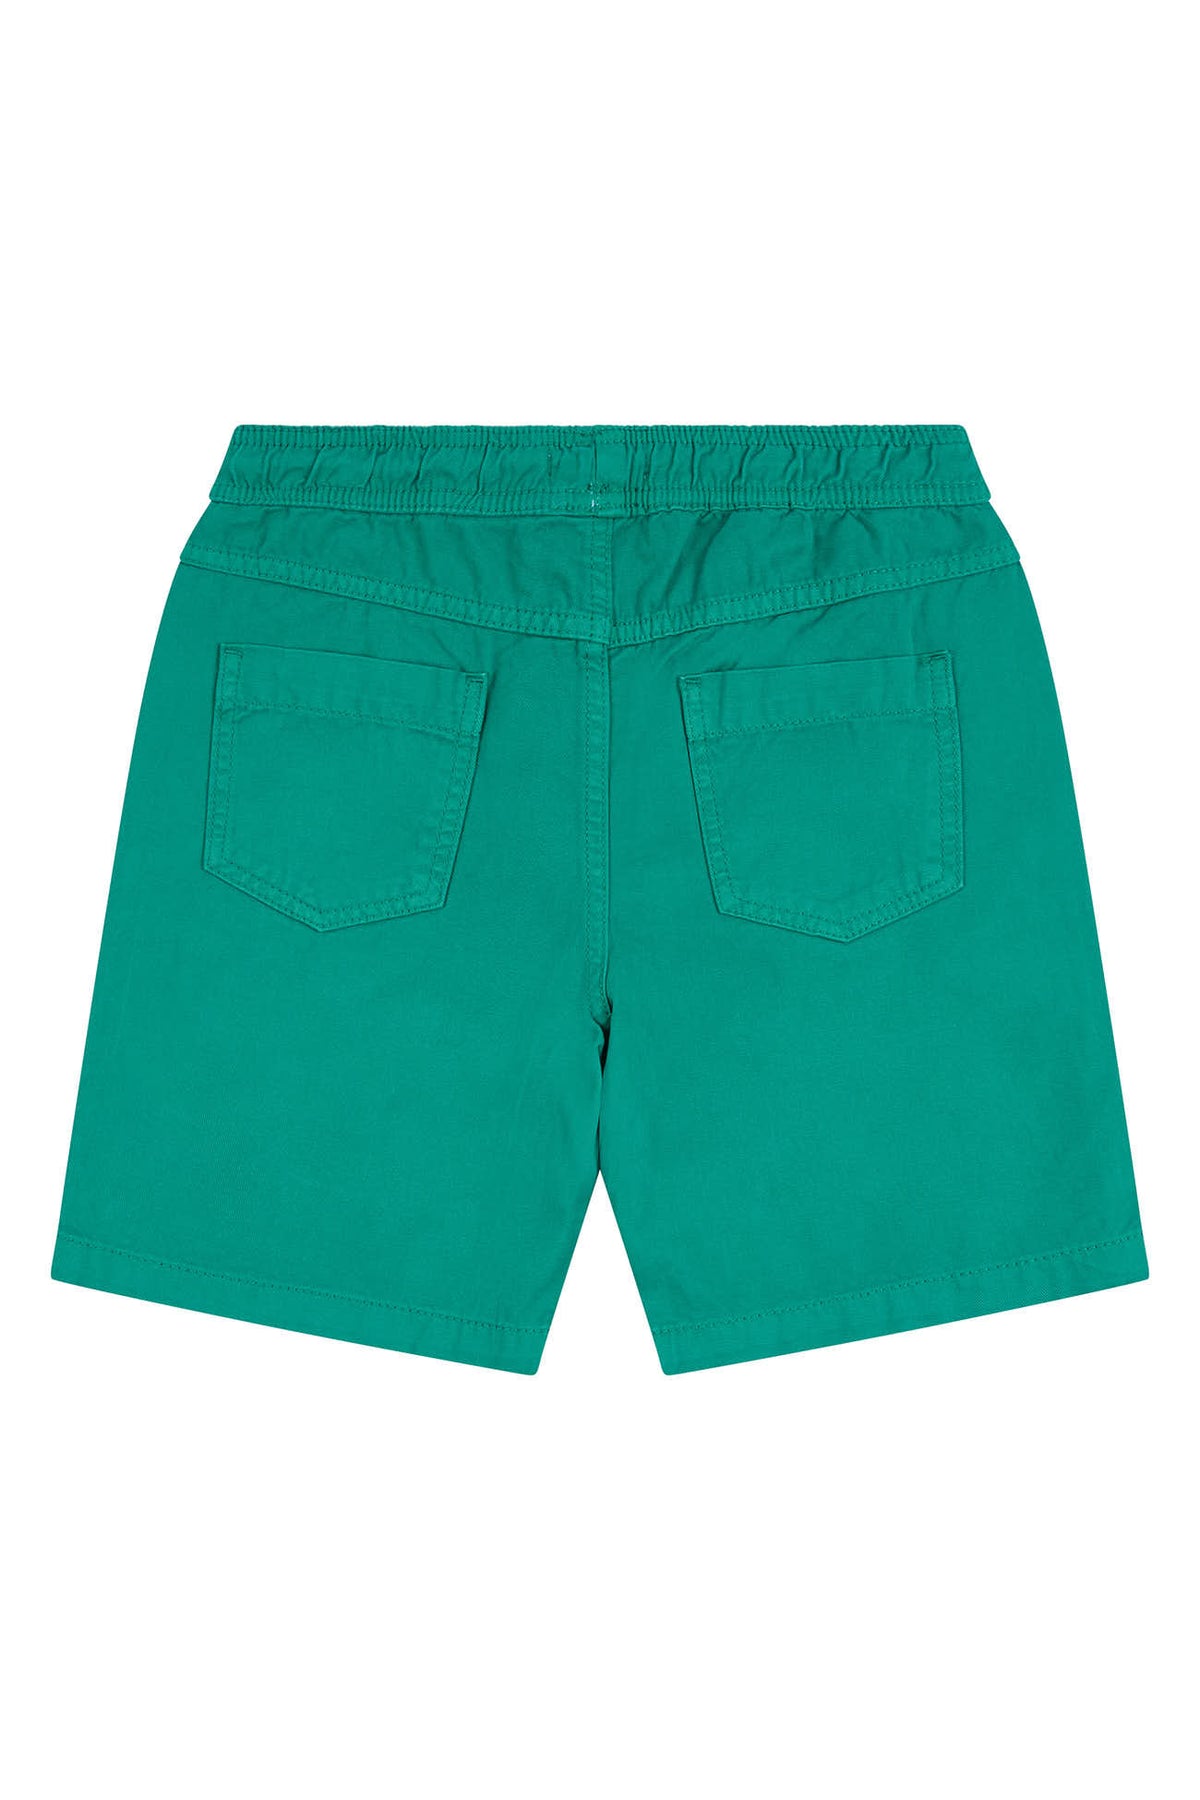 Boys Classic Shorts in Ivy